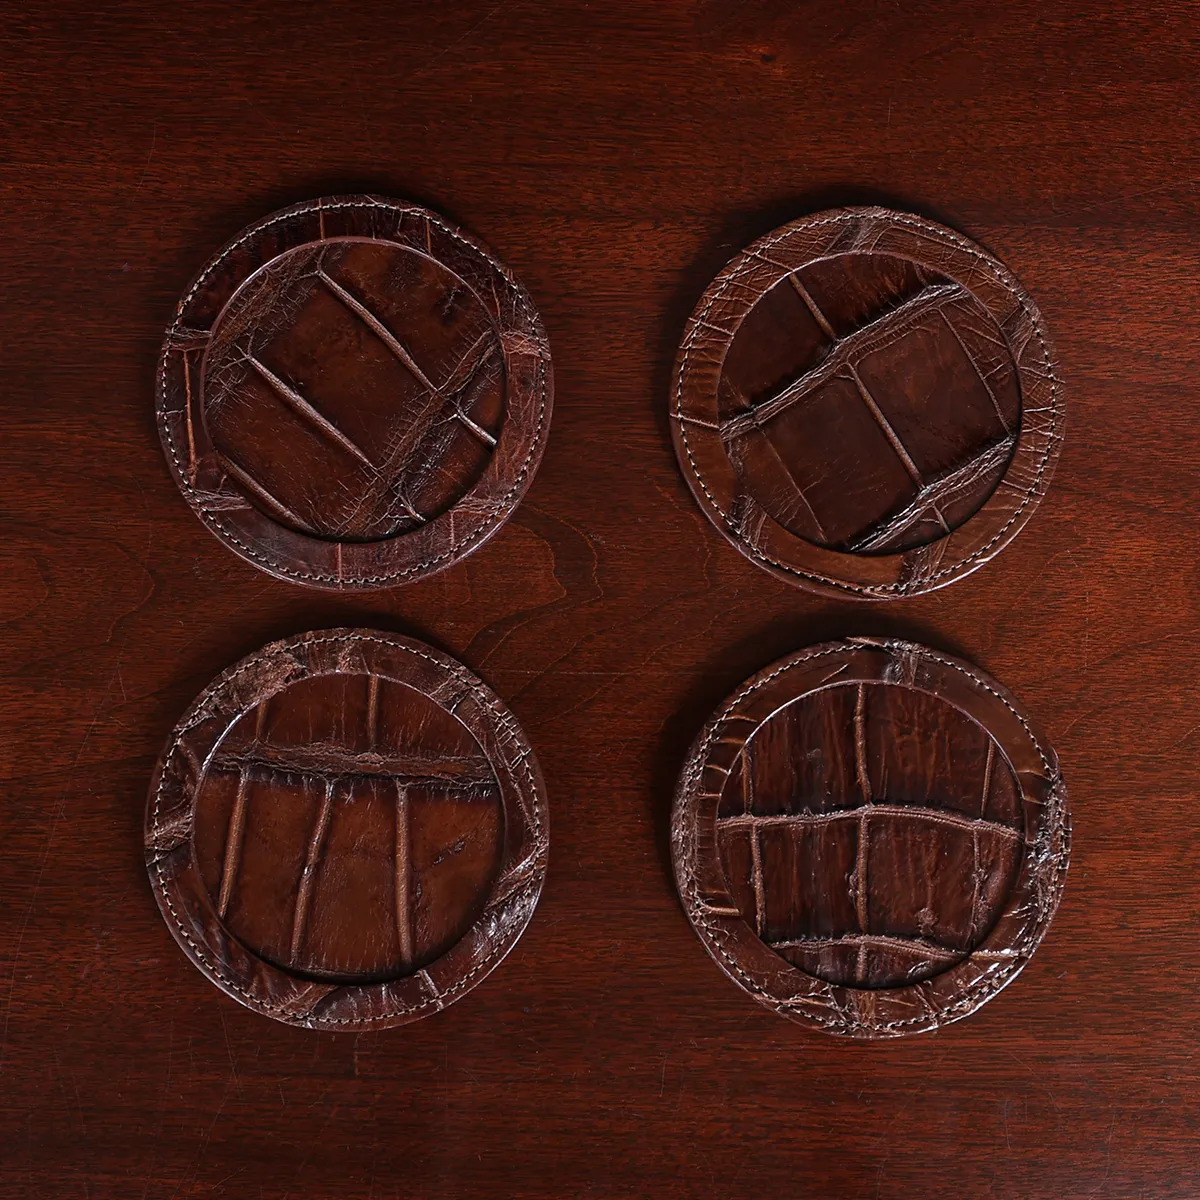 Round leather coasters in Brown American Alligator - set of 4 - ID 001 - back view of 4 coasters fanned out in a stack on black background